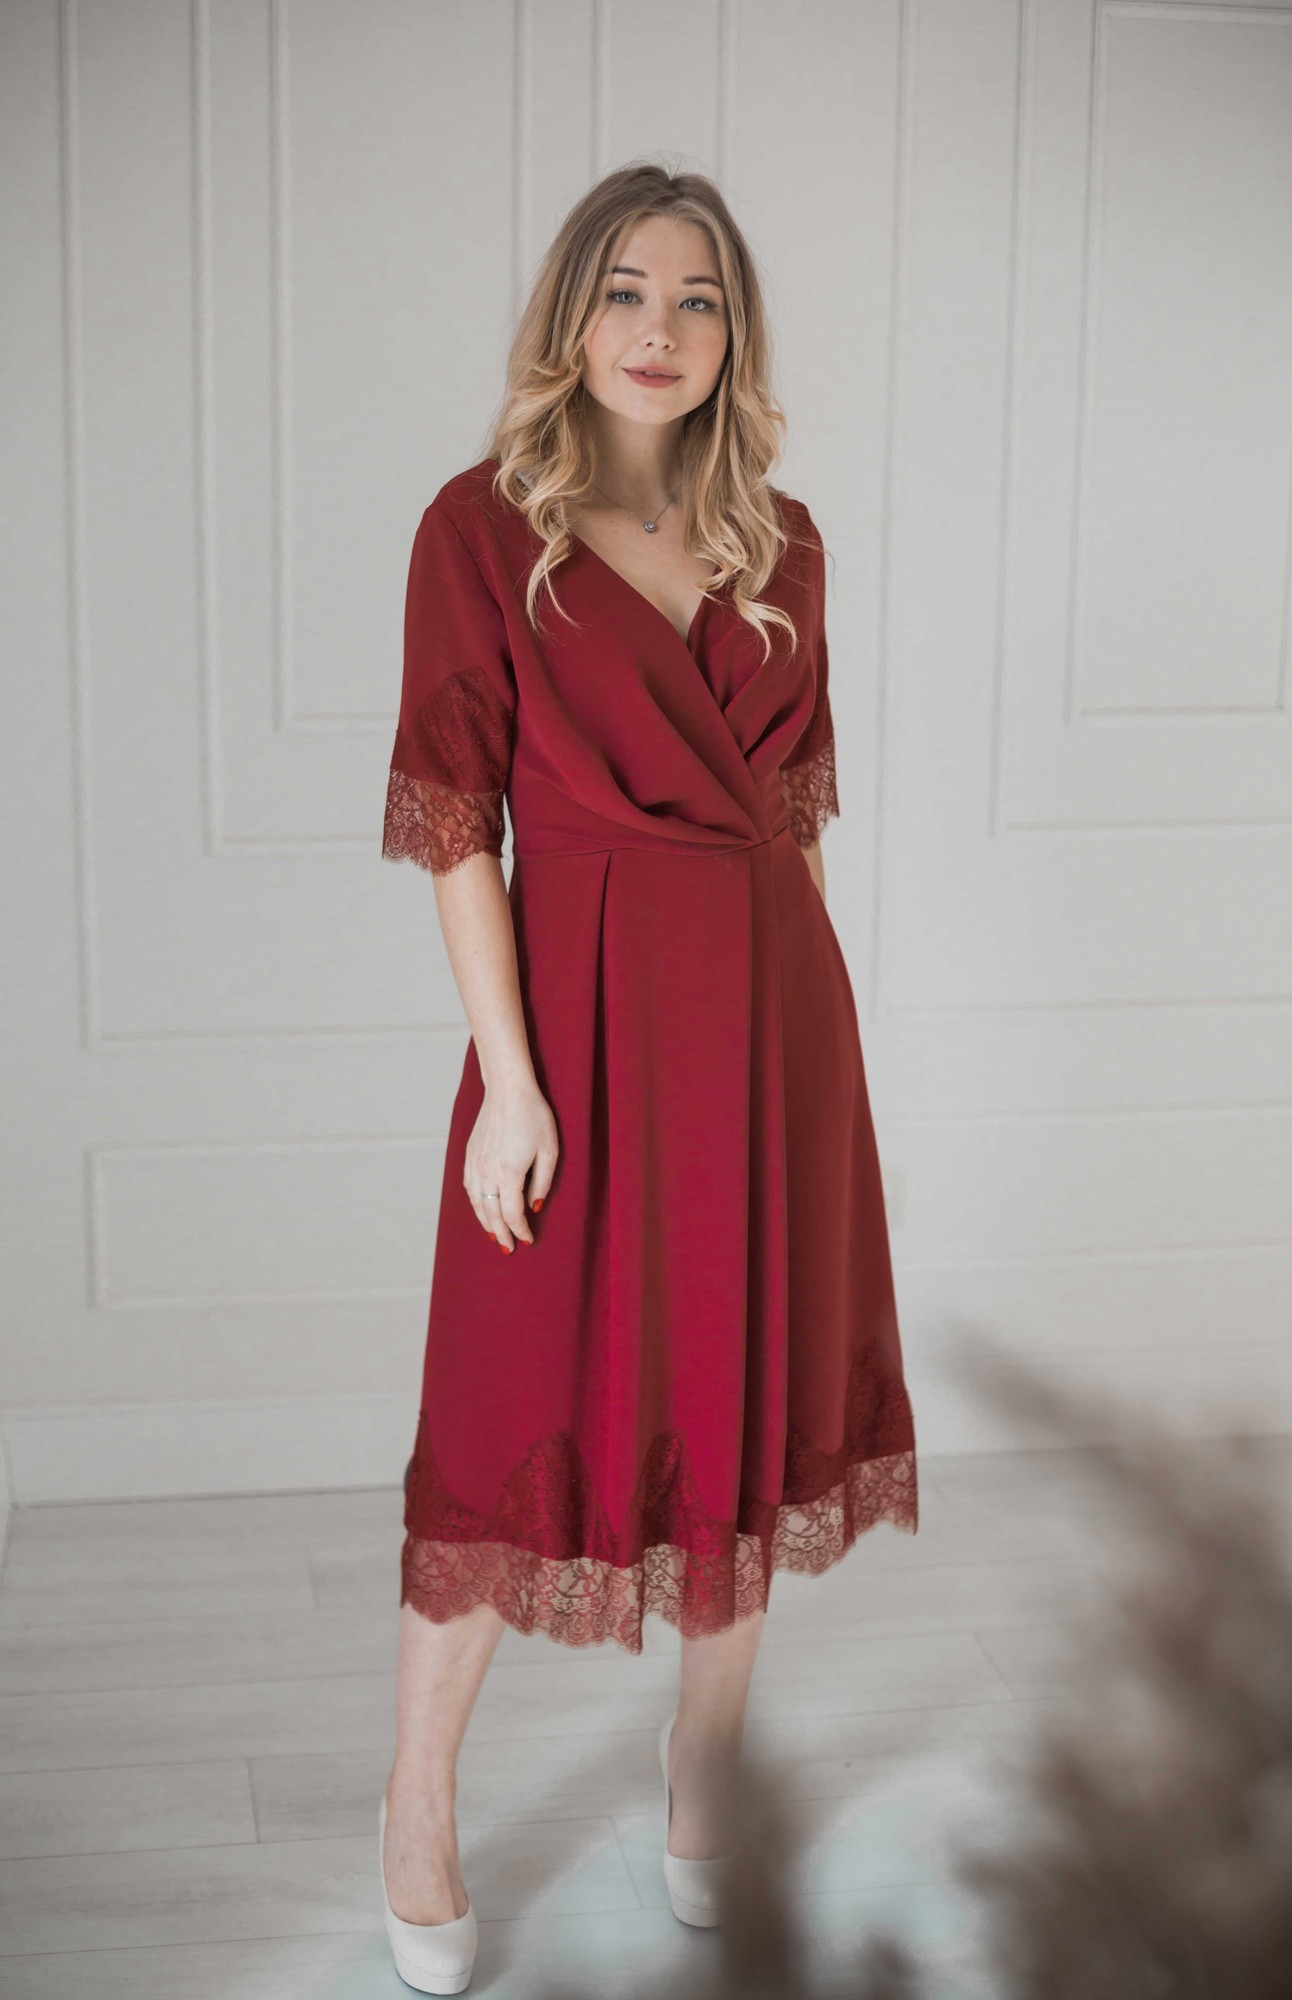 Cherry dress with lace